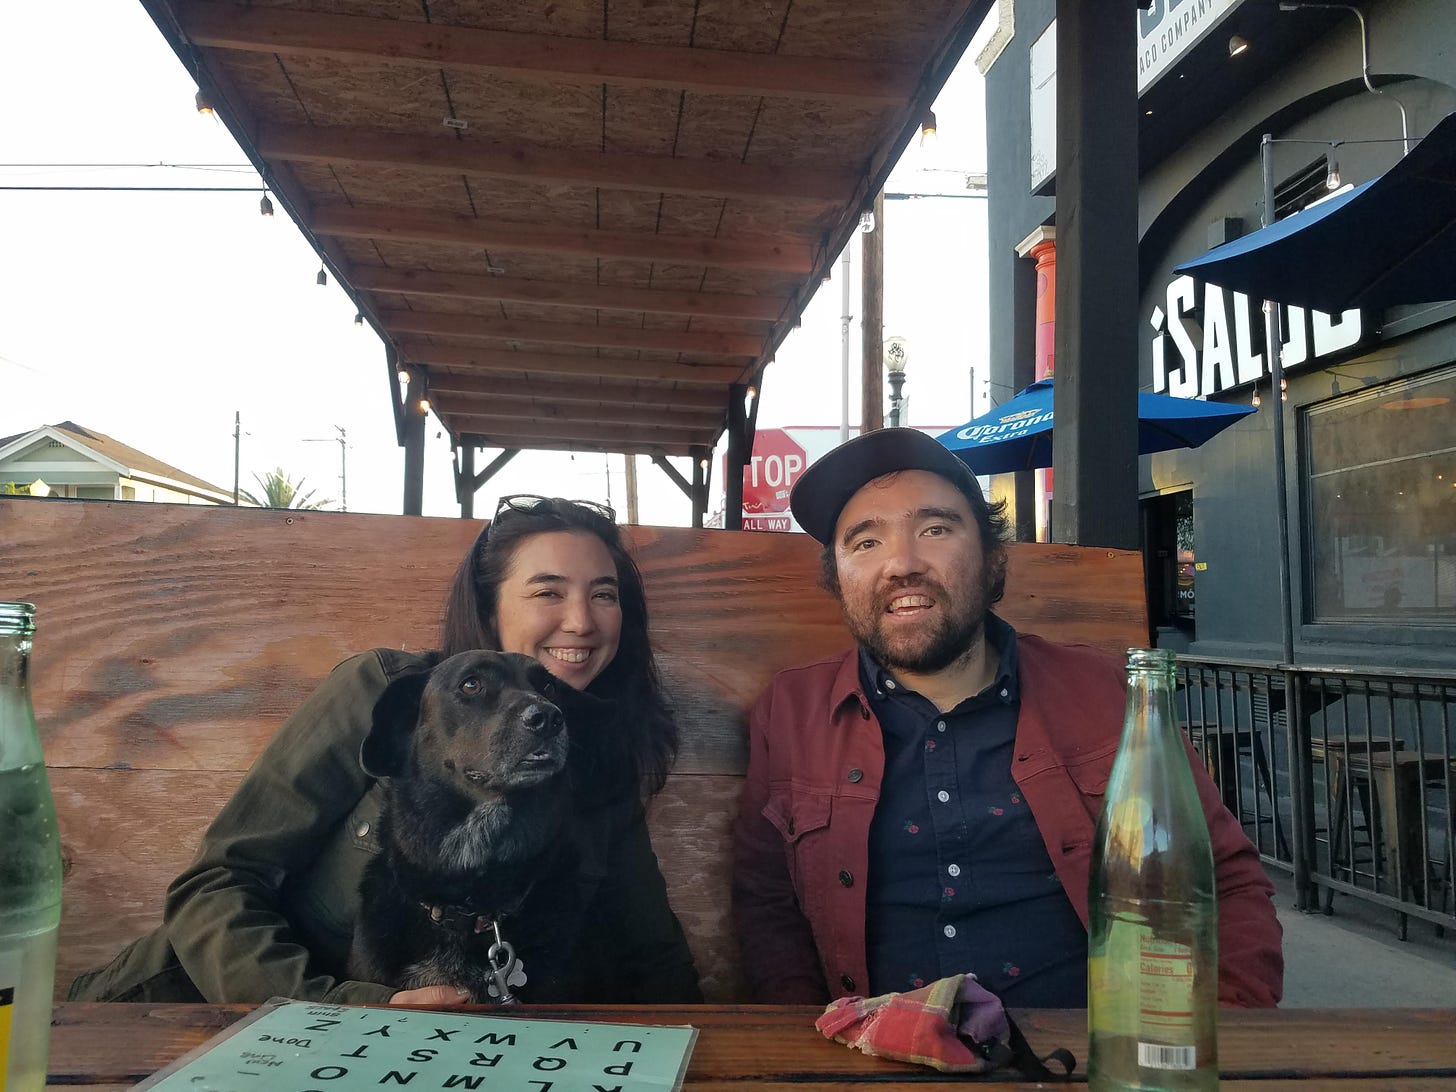 A smiling man with brown hair, short beard, brown baseball cap, and red jacket seated next to a smiling women with black hair and a green jacket, at an outdoor restaurant booth. The woman has a cute black lab mix dog in her lap. There is a letterboard on the table.